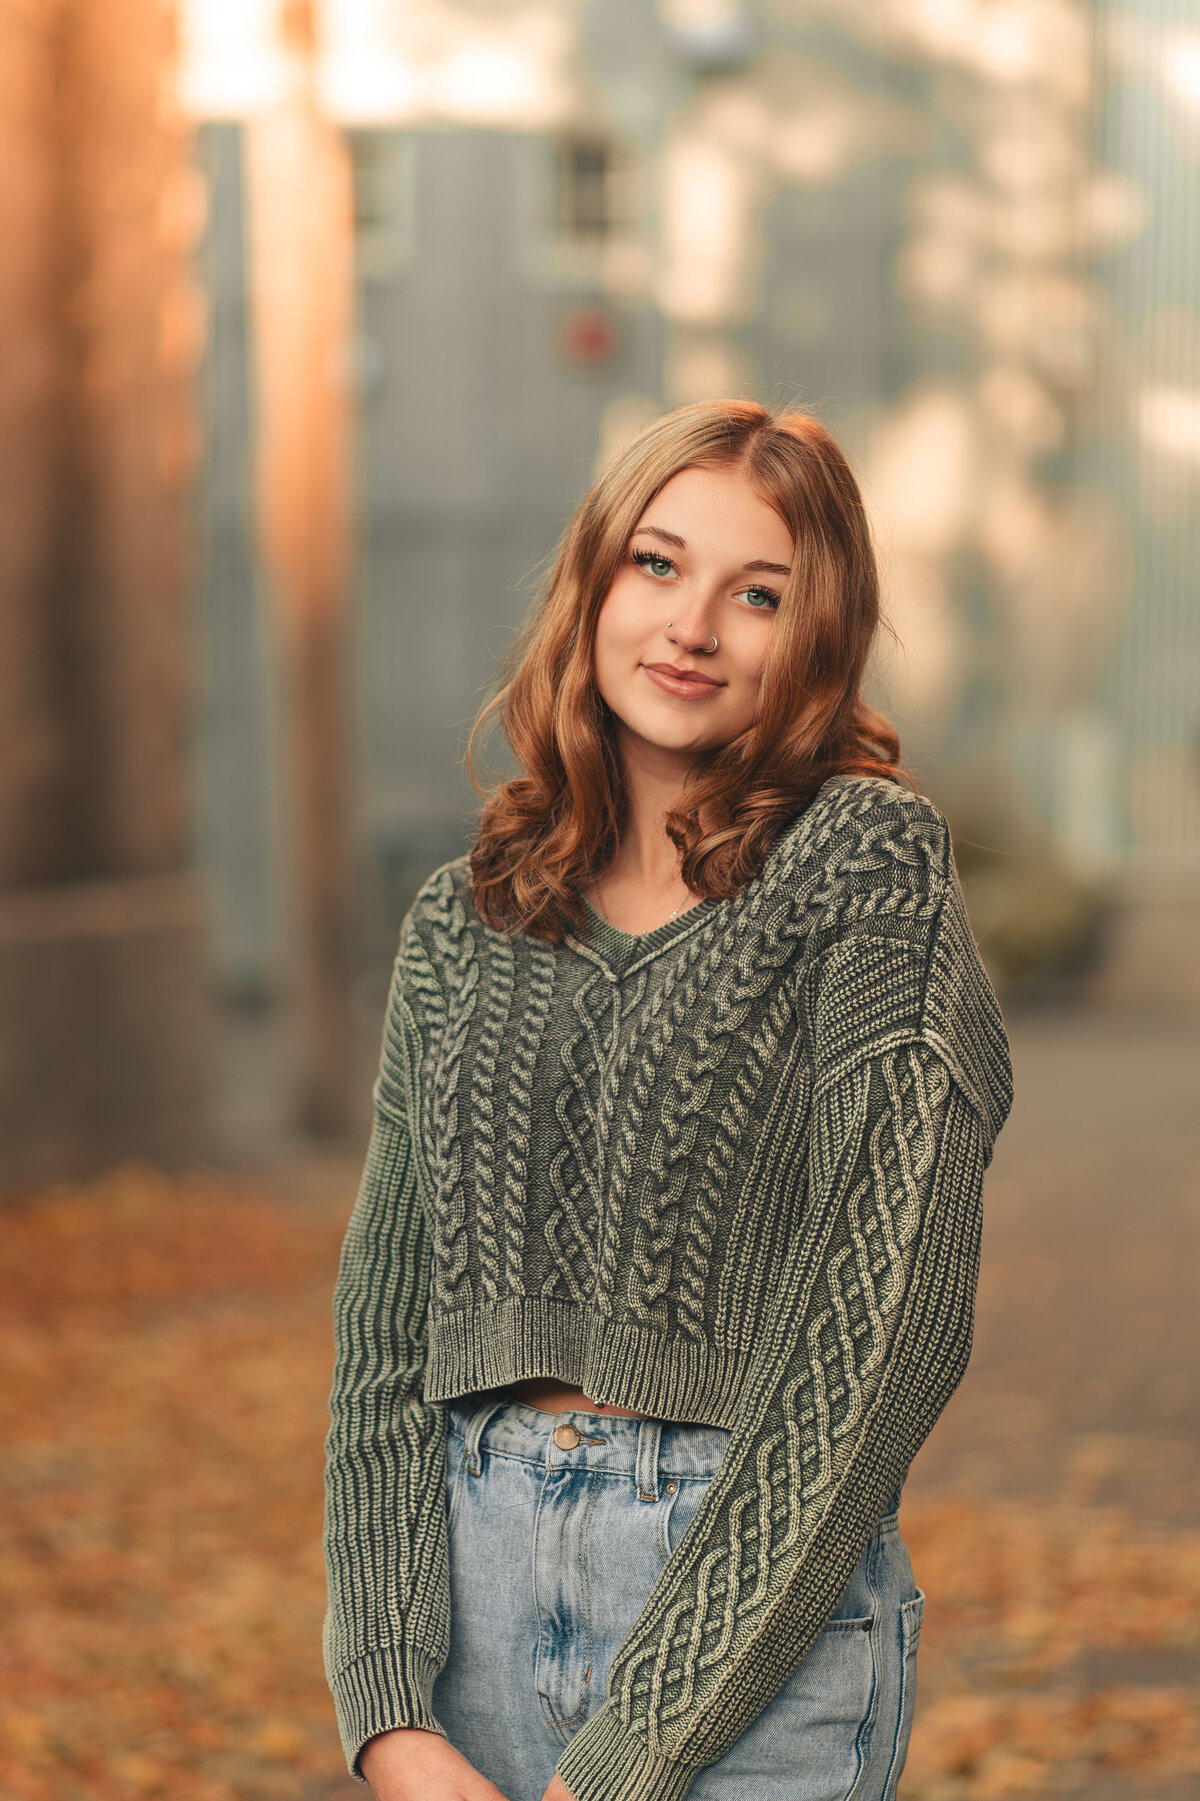 Bask in riverside radiance with Shannon Kathleen Photography's high school senior portraits in downtown Stillwater. Capture your essence against the scenic backdrop. Book now